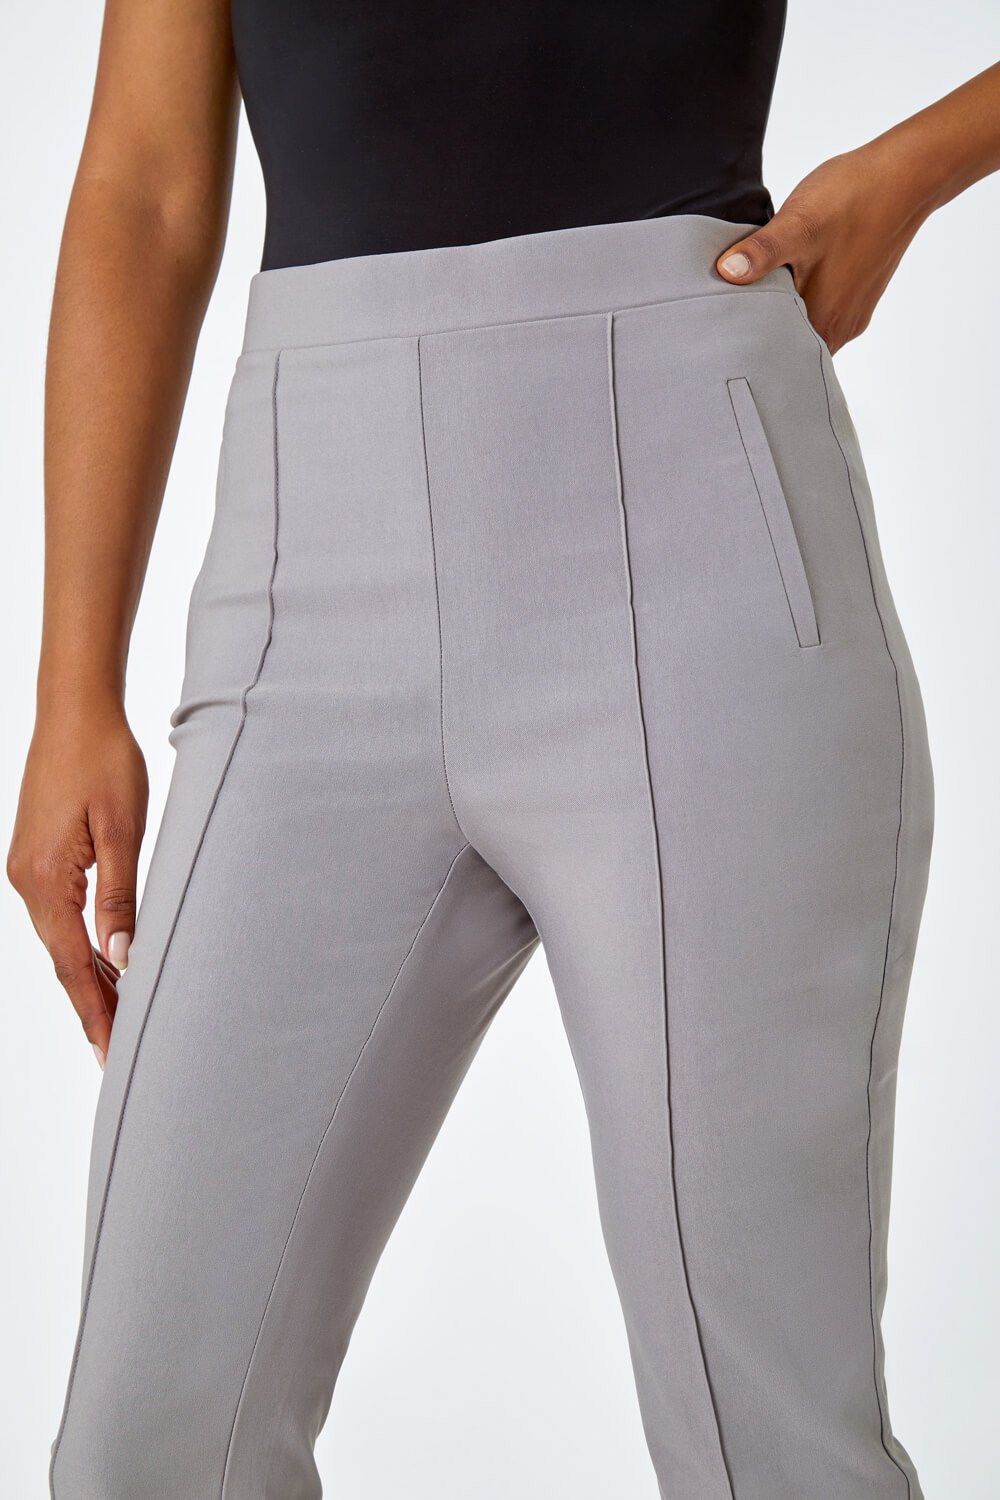 Taupe Seam Detail Stretch Cropped Trousers, Image 5 of 5